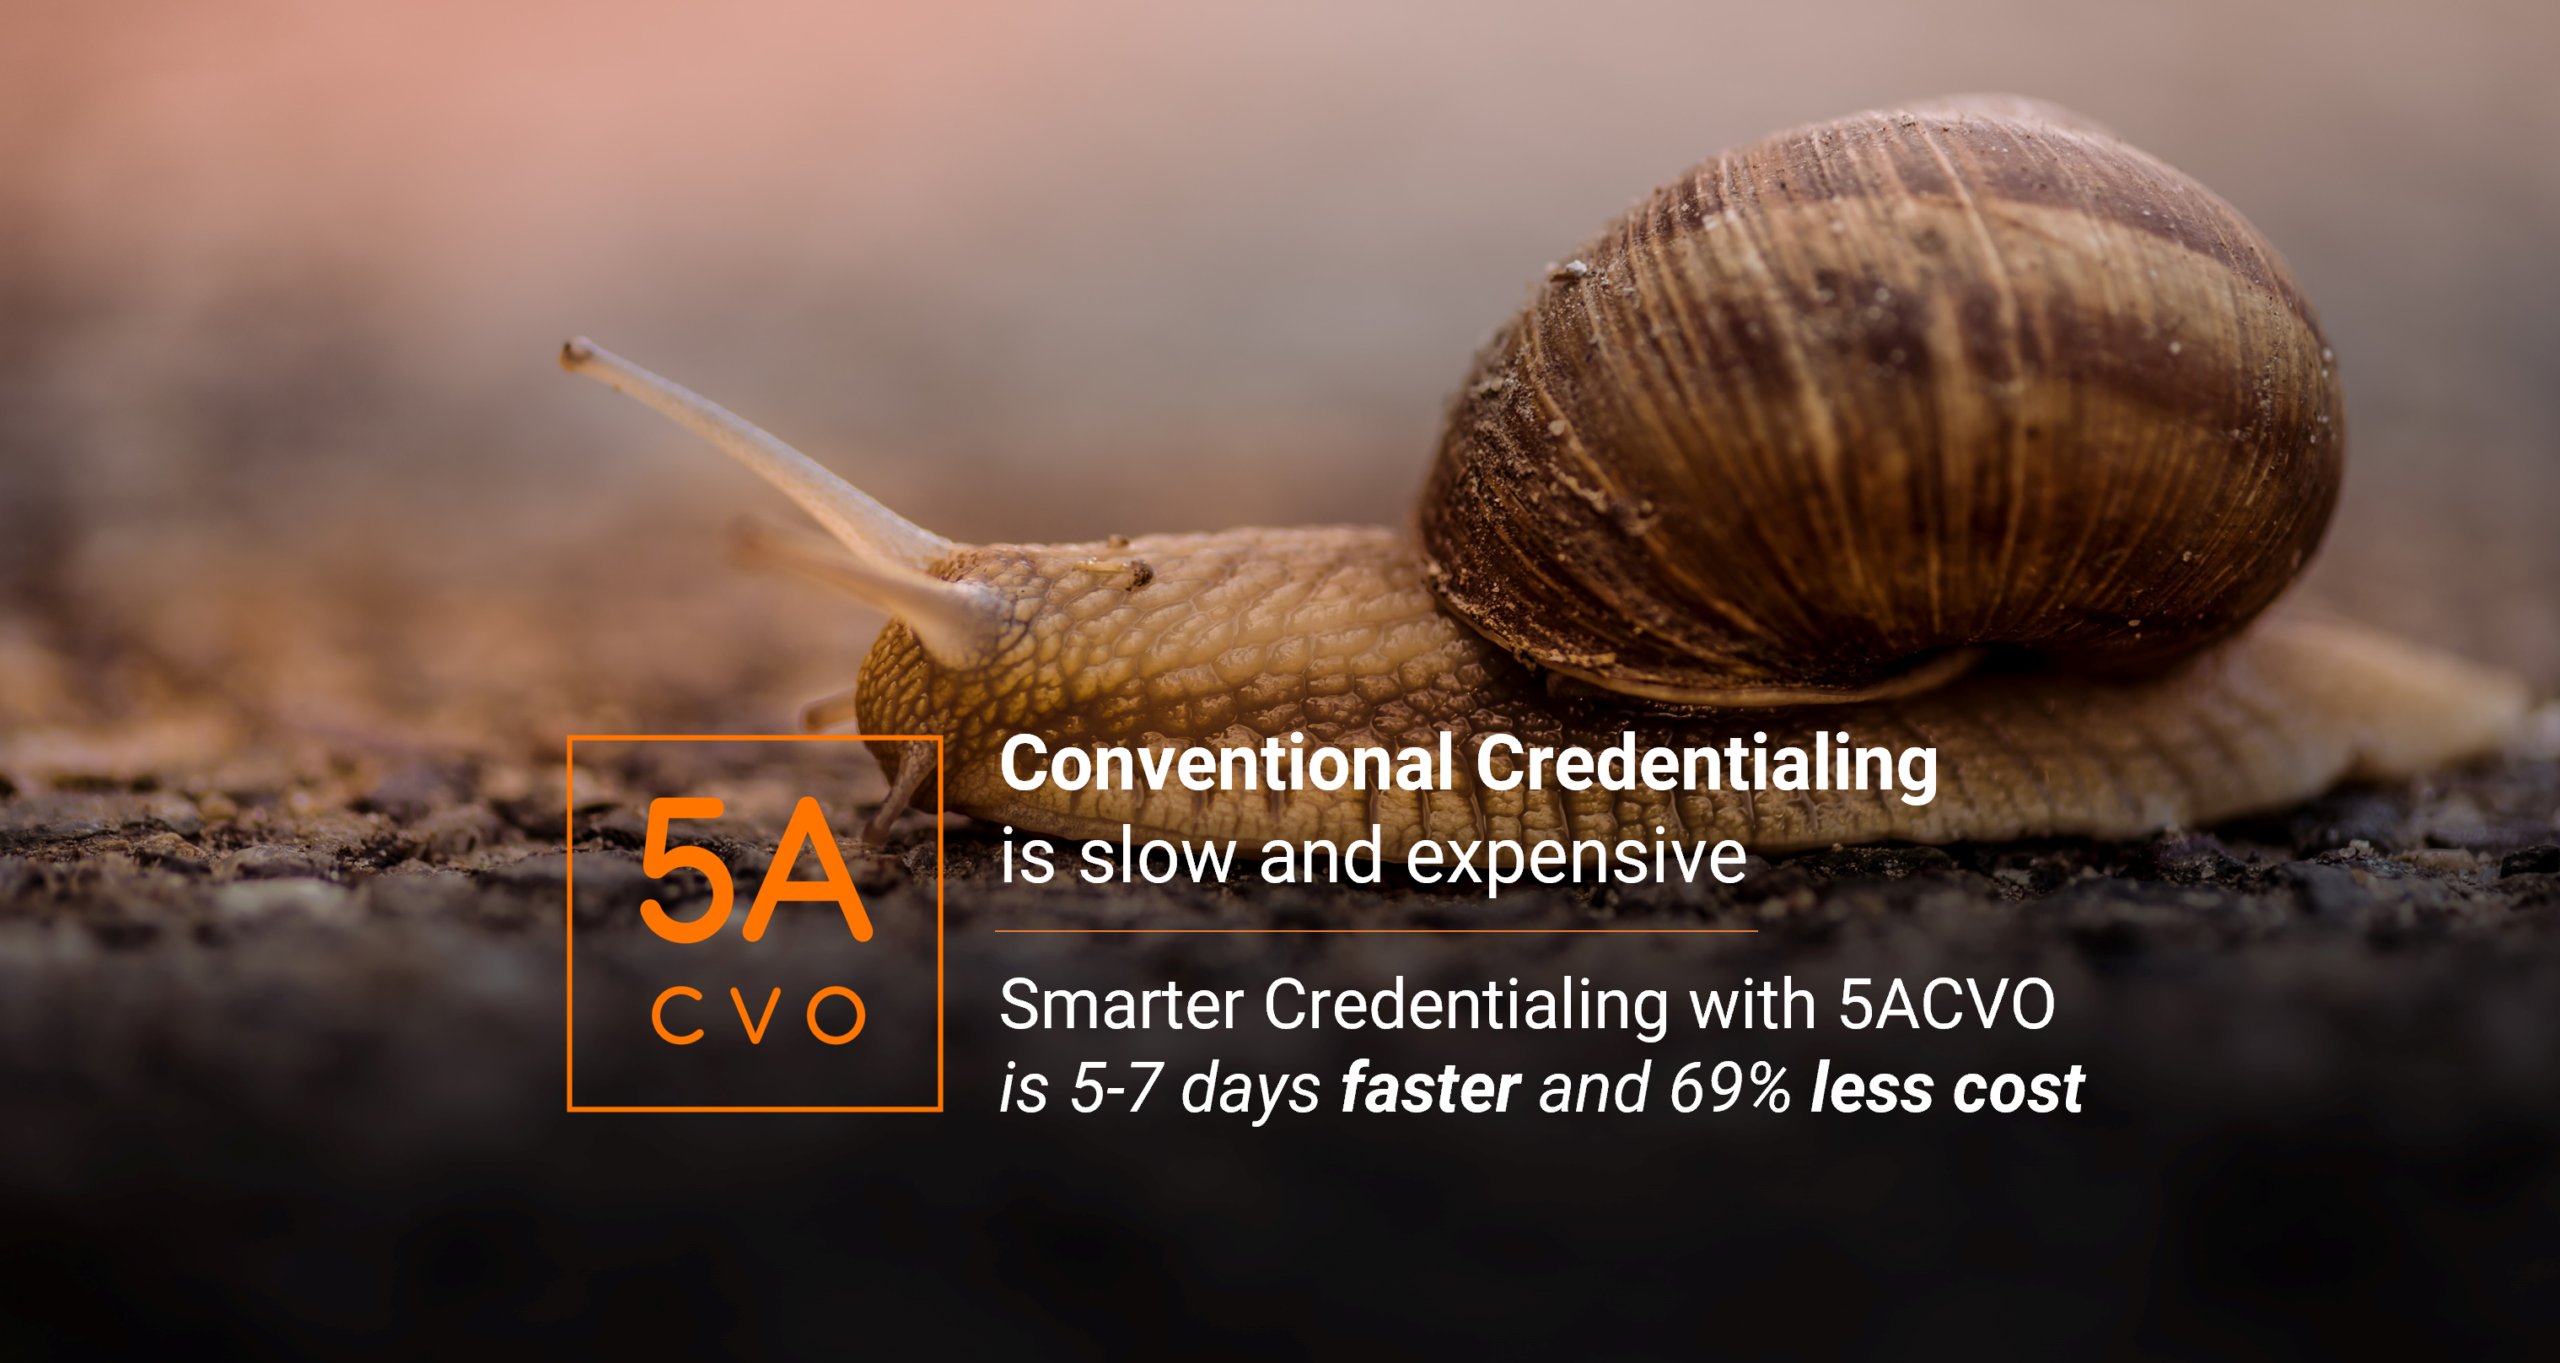 How can we make credentialing faster and cheaper?